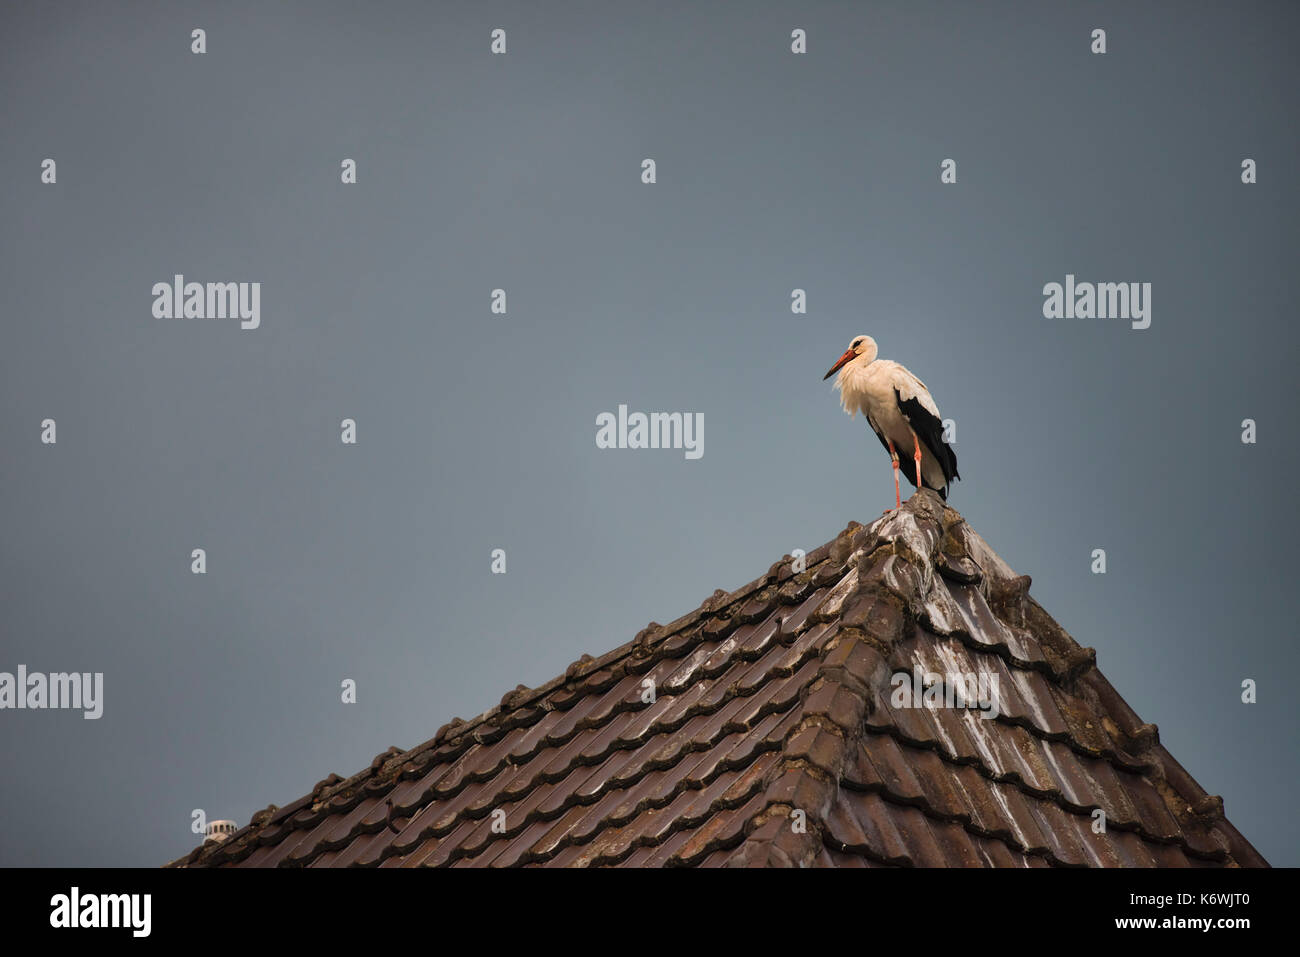 White stork (Ciconia ciconia), on rooftop, thunderstorm atmosphere, Bad Saulgau, Baden-Württemberg, Germany Stock Photo